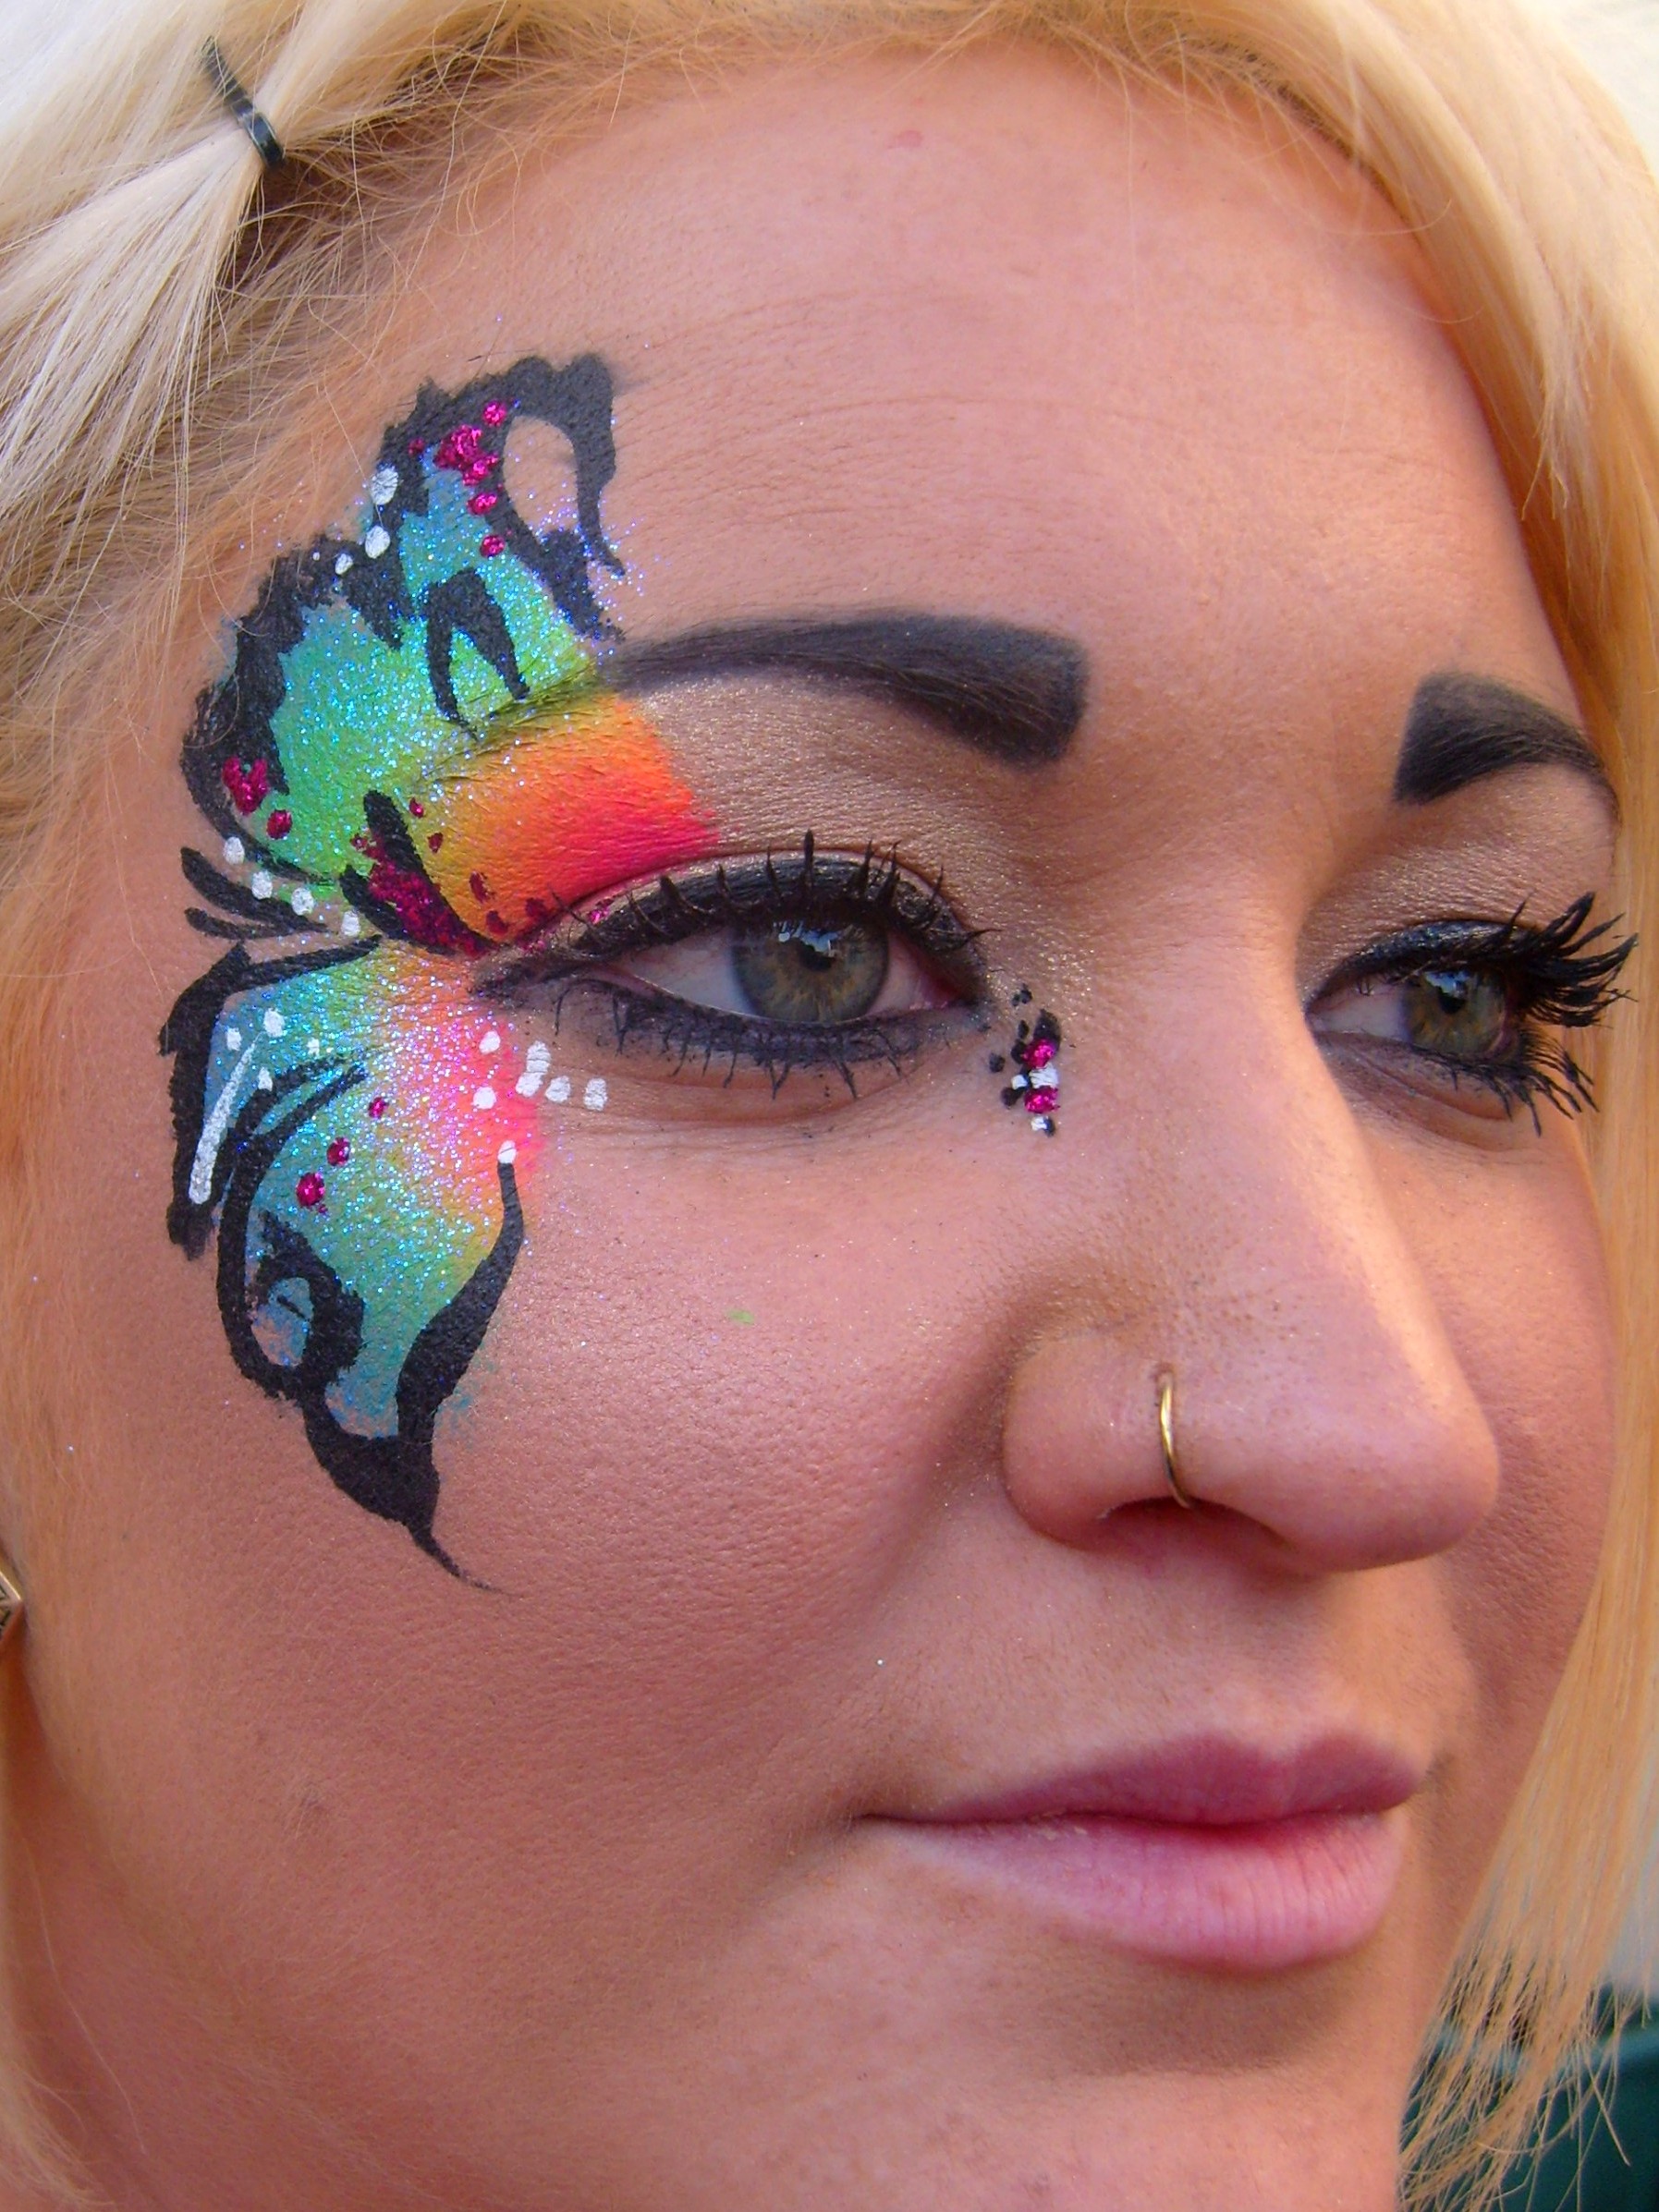 'Exceptional quality face painting and great fun!' 07770 618343